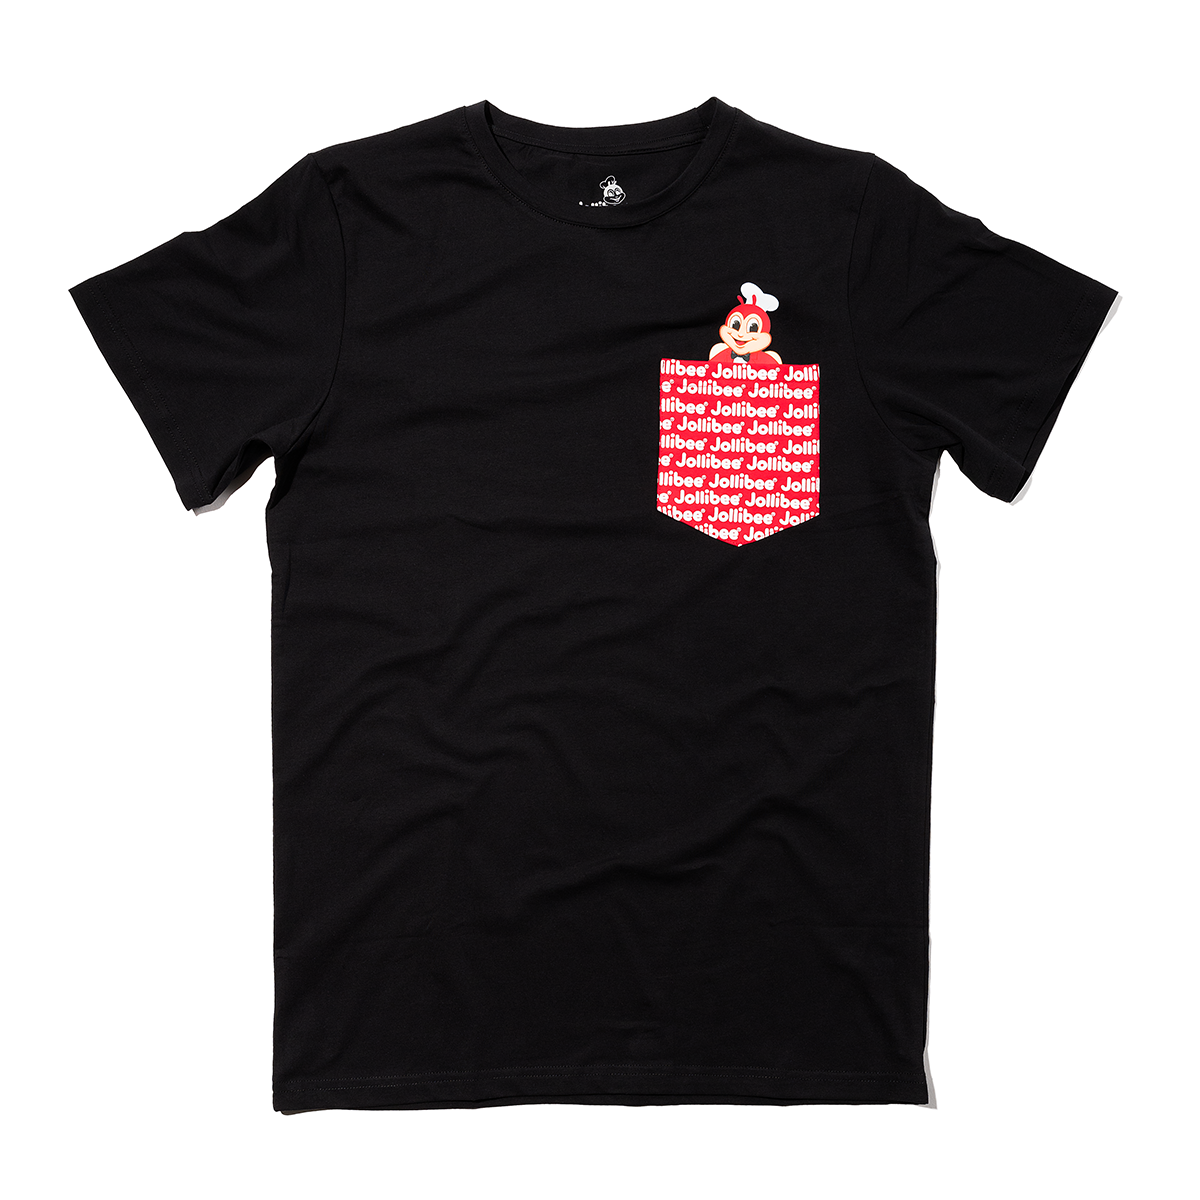 Black T-shirt With Red Pocket